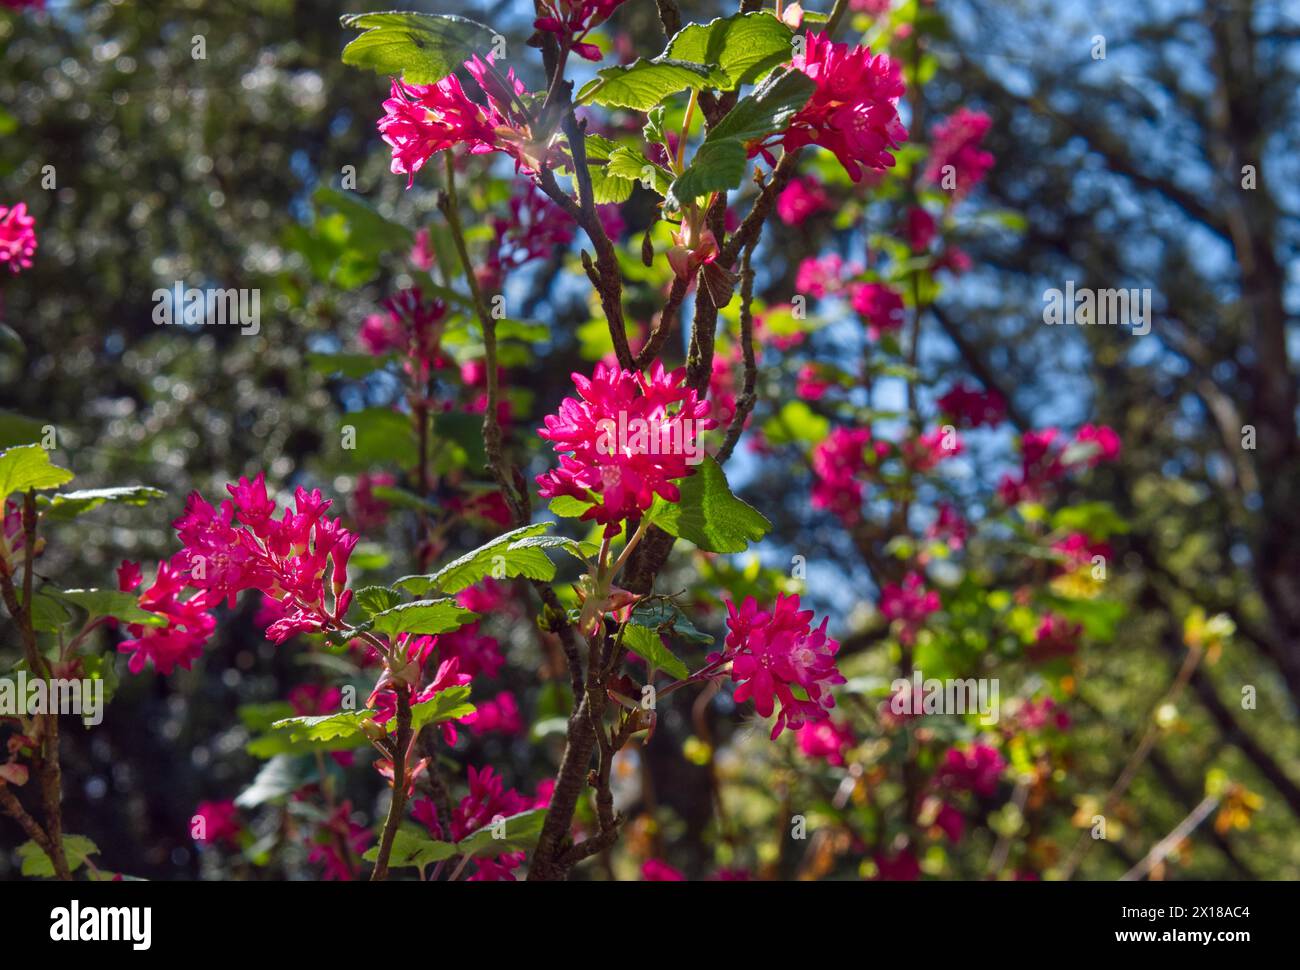 Rhododendron, several flowers, (Rhododendron hypoglaucum) Stock Photo